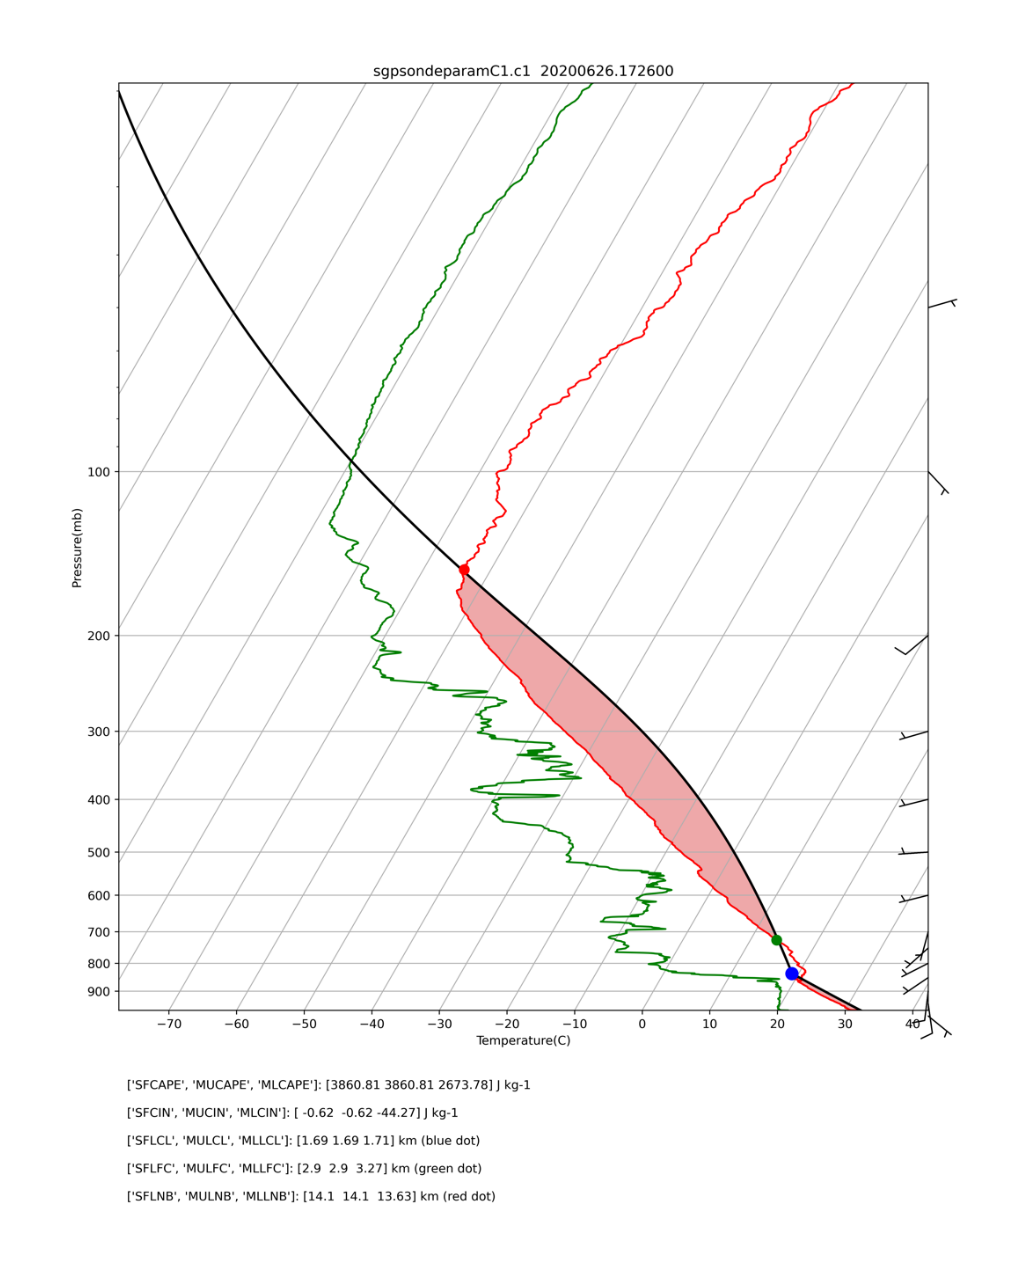 Lines show pressure and temperature recorded by an ARM radiosonde.